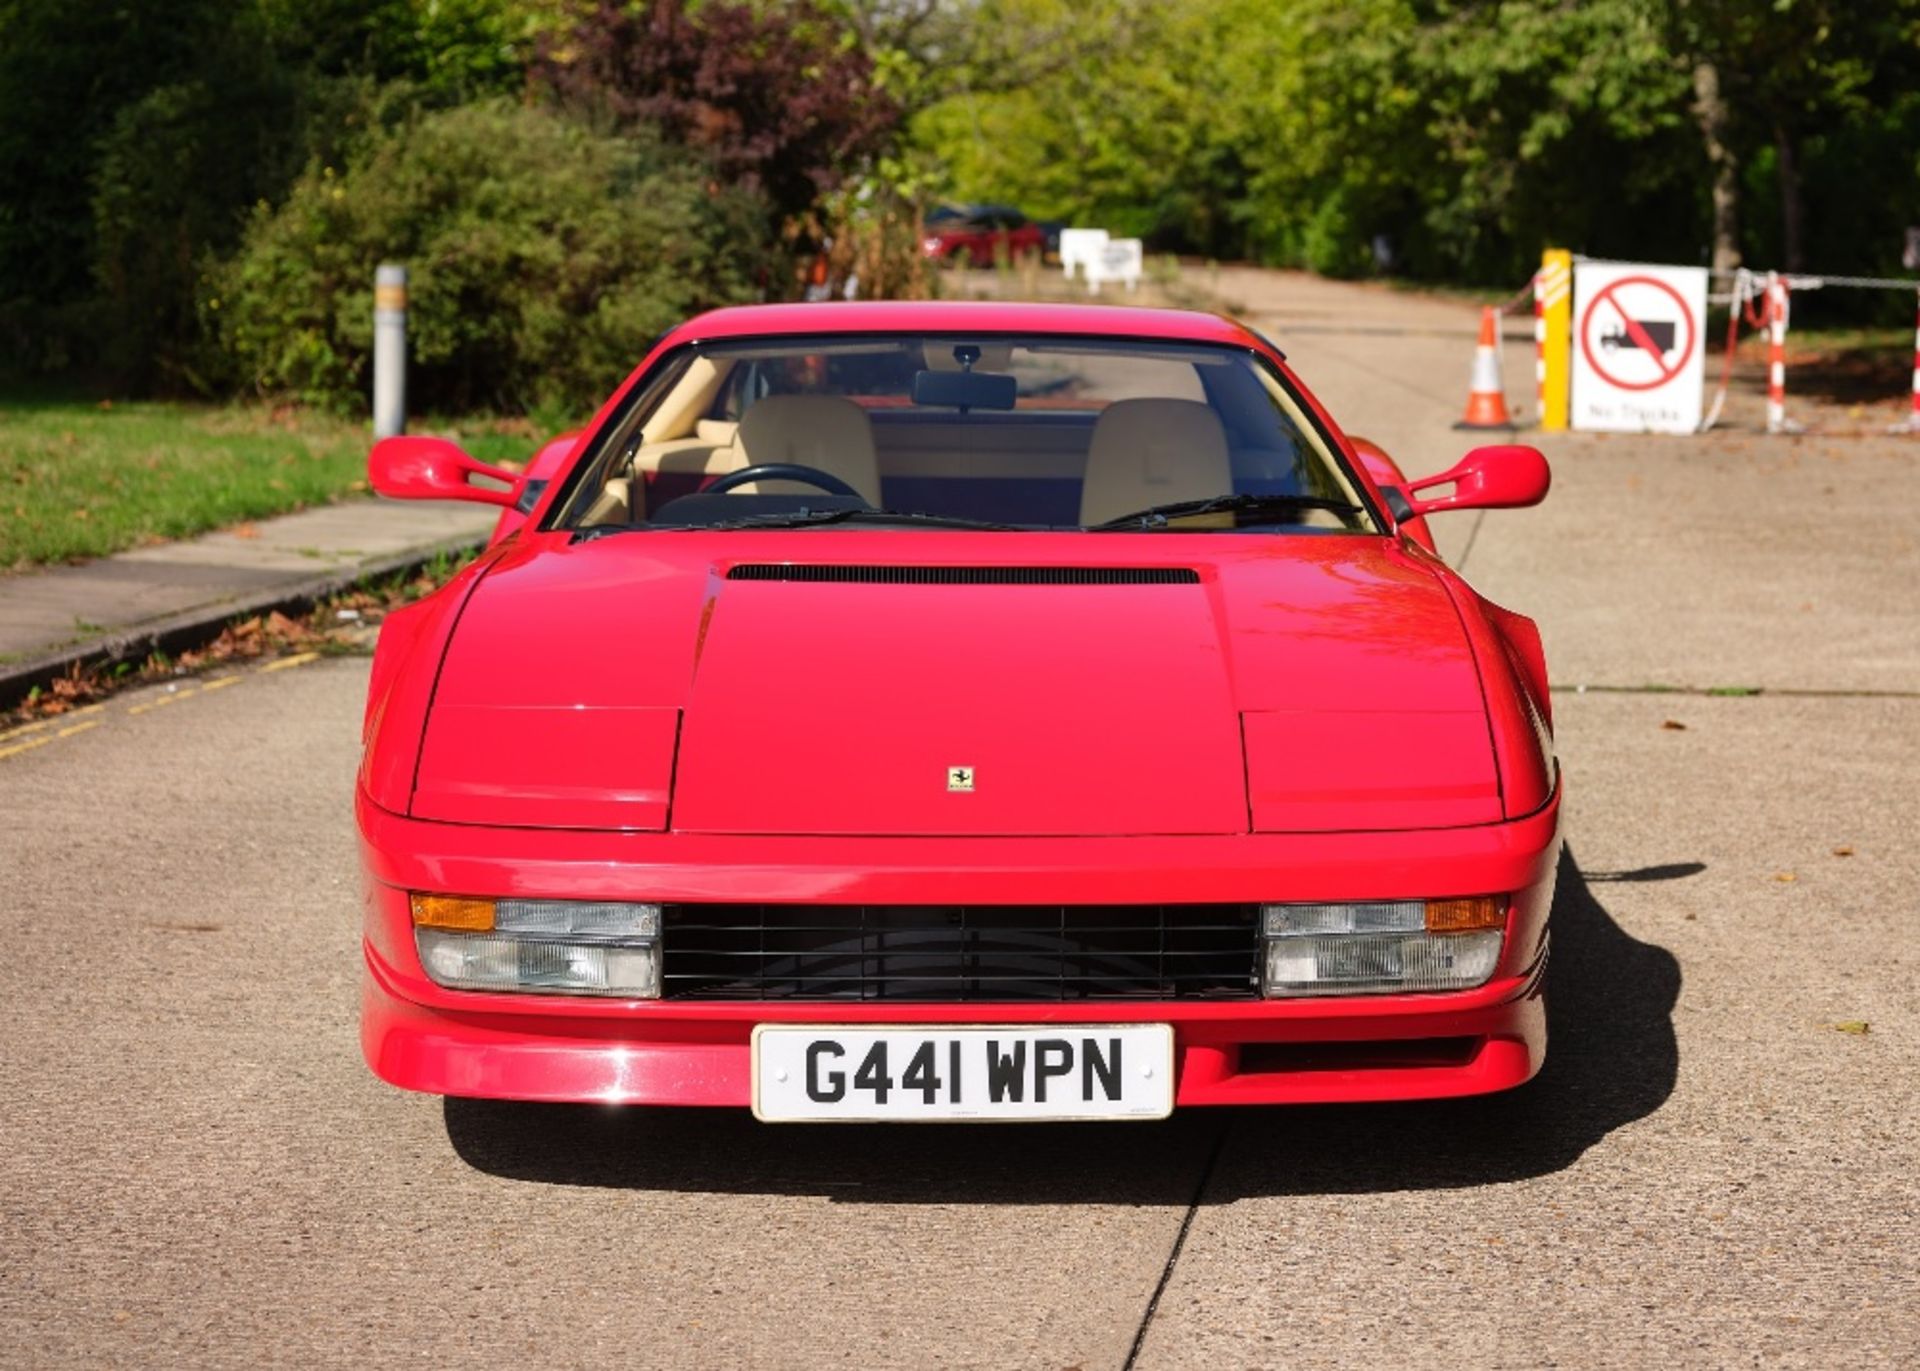 1989 FERRARI TESTAROSSA Registration Number: G441 WPN Chassis Number: ZFFAA17C000082817 Recorded - Image 5 of 59